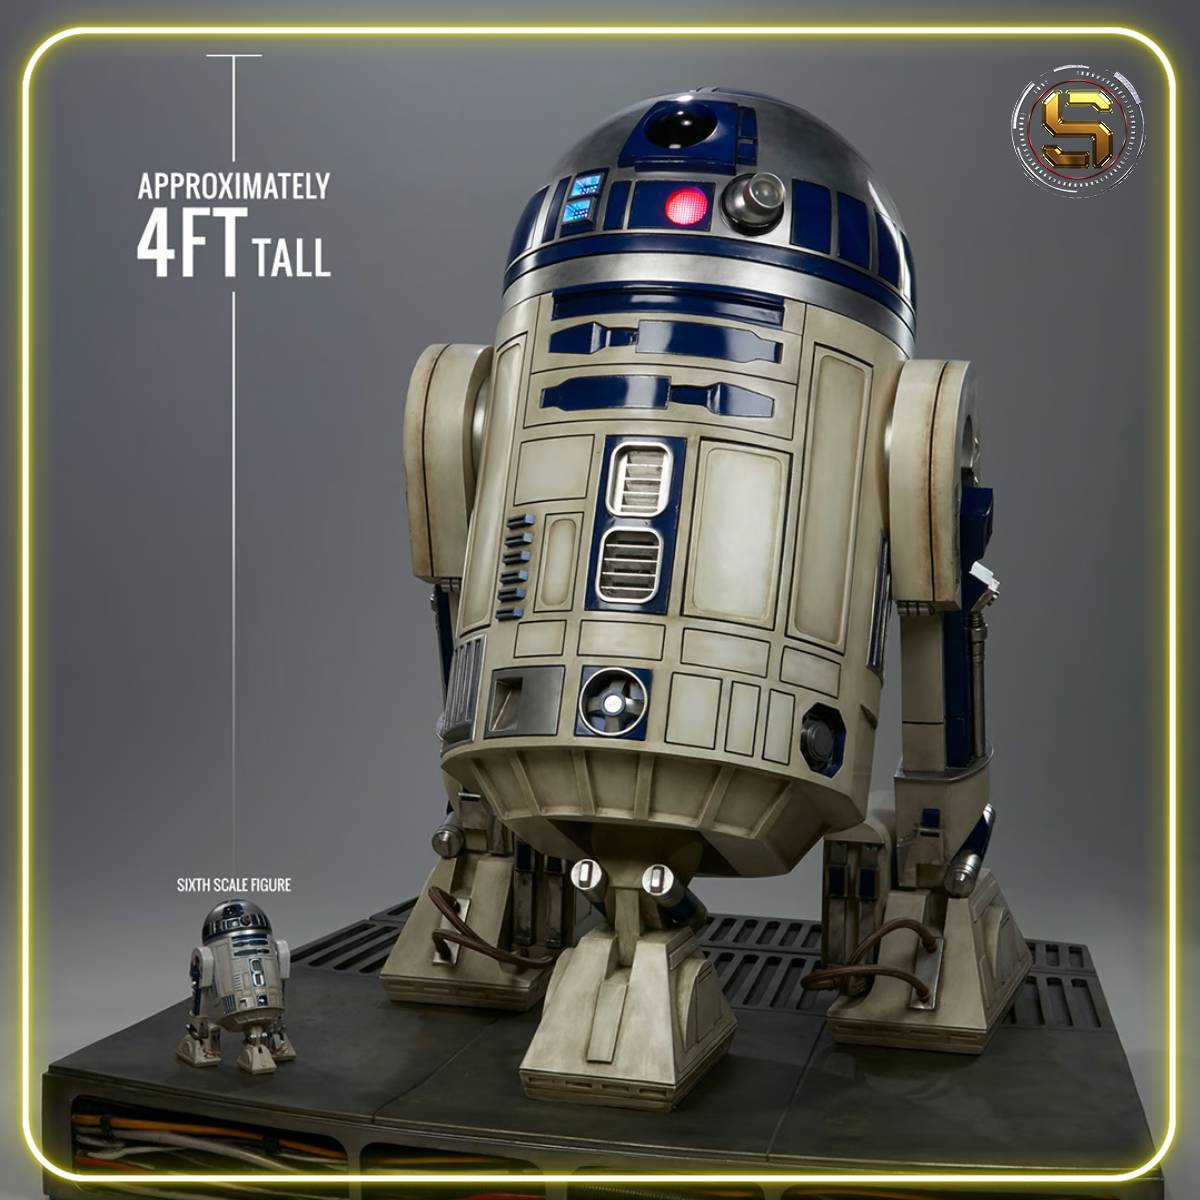 SIDESHOW STAR WARS R2-D2 LIFE-SIZE FIGURE